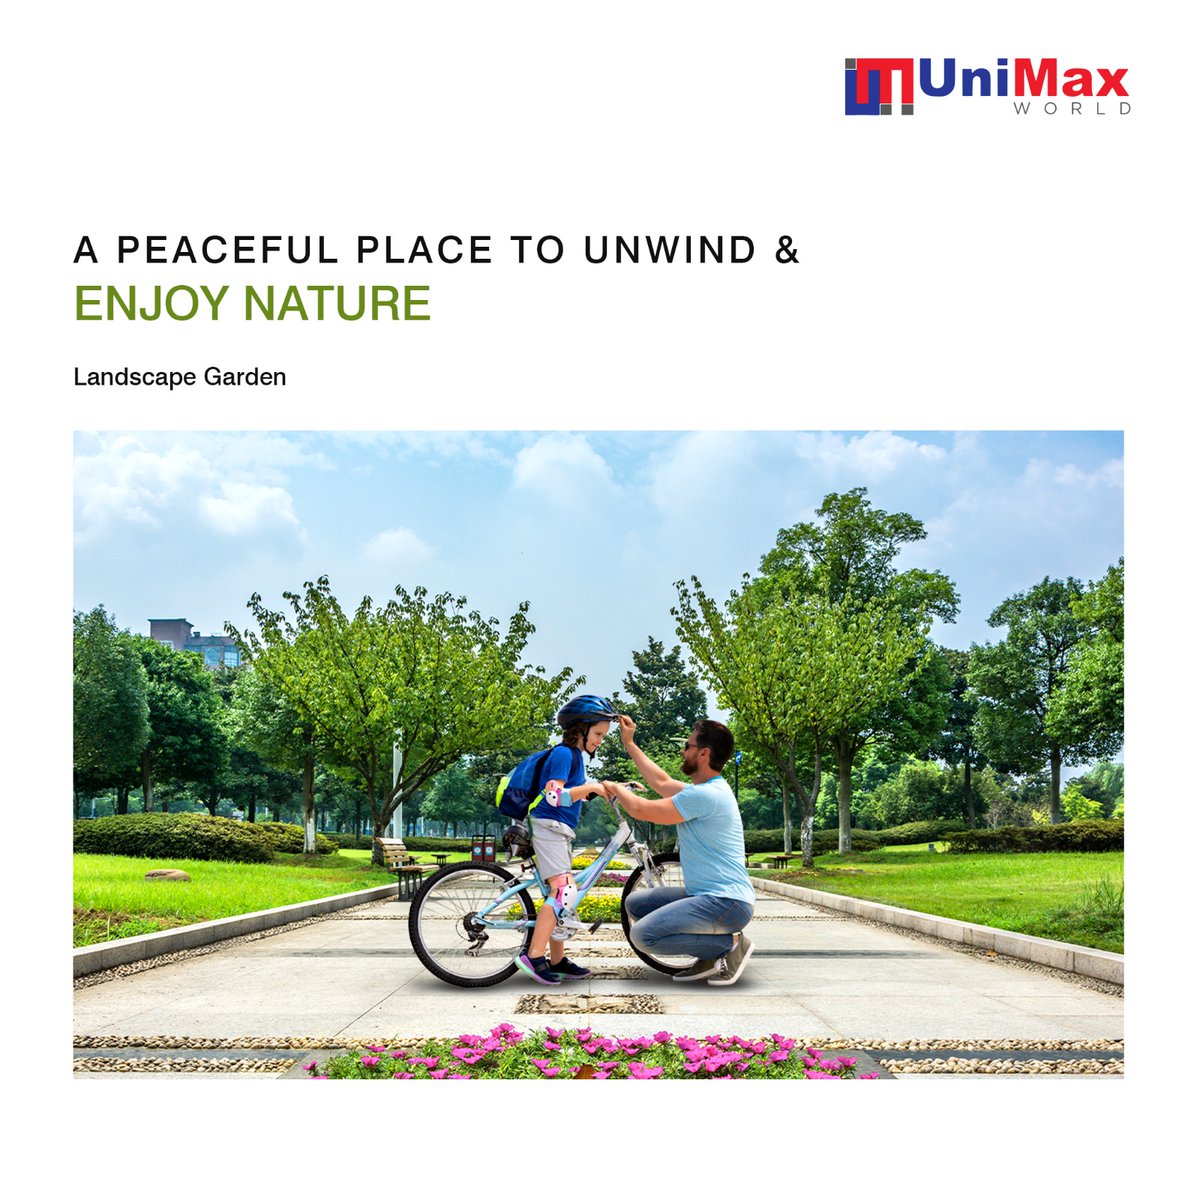 Escape the chaos & embrace serenity amidst nature exclusively at our landscape garden only at Unimax.

#UnimaxWorld #EscapeTheChaos #EmbraceSerenity #LandscapeGarden #NatureRetreat #Unimax #PeacefulMoments #CalmAmidstNature